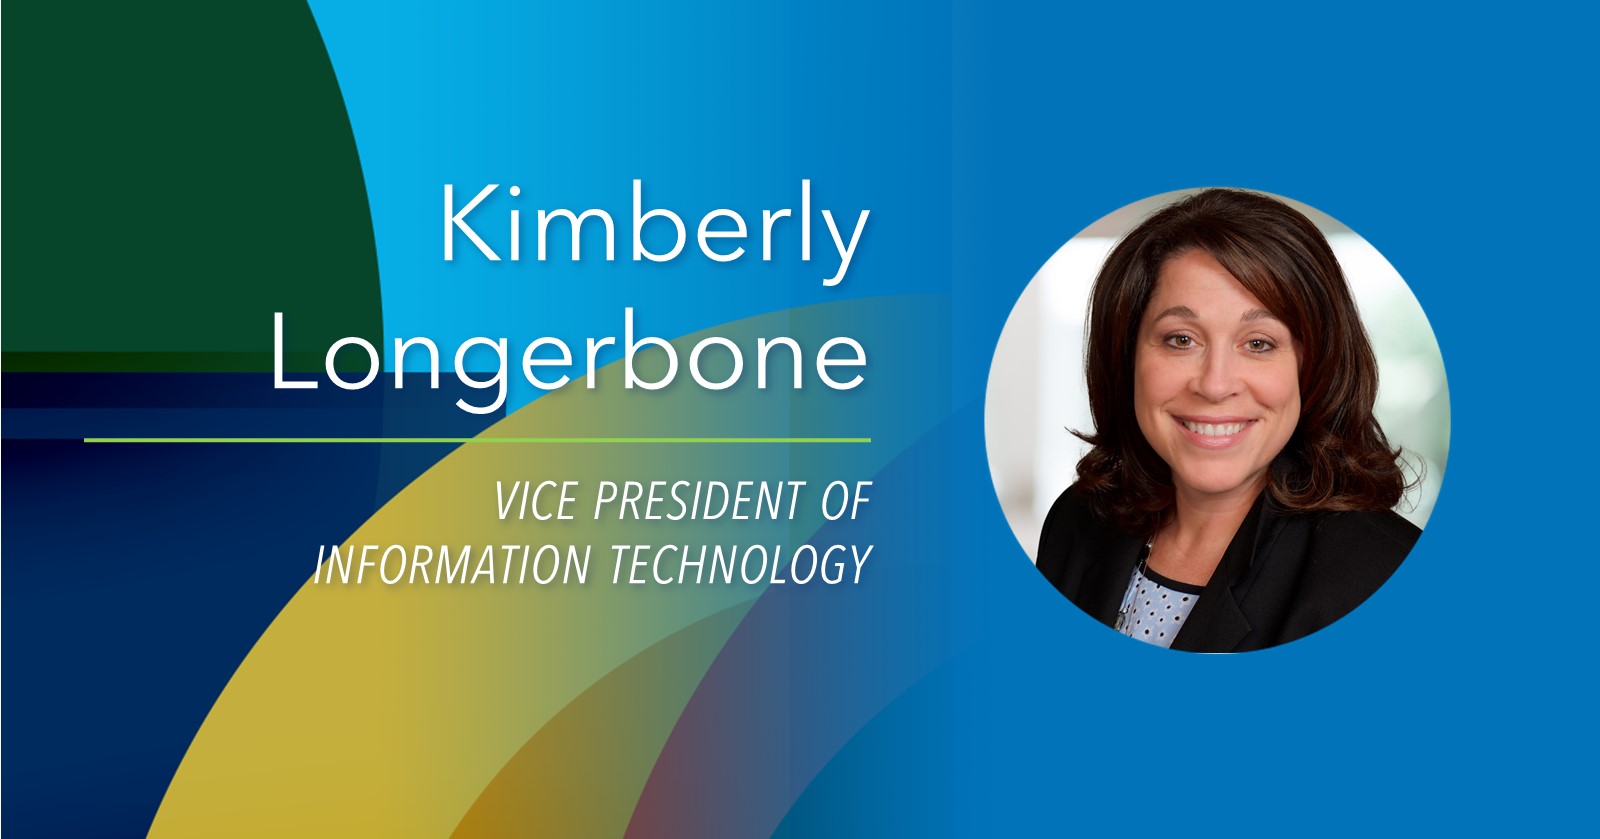 Kimberly Longerbone Joins Empyrean as Vice President of Information Technology